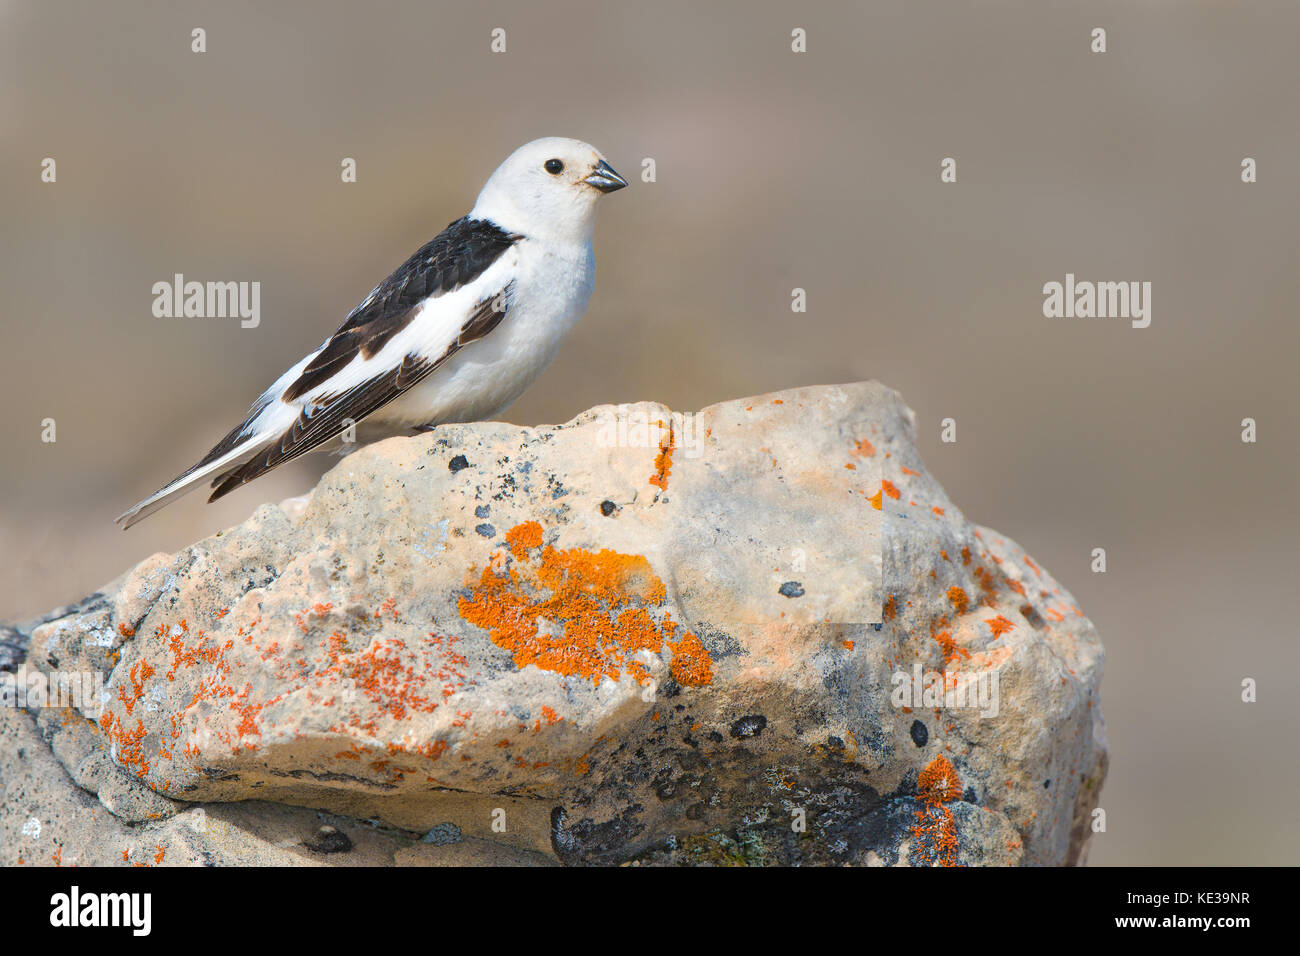 Adult male snow bunting (Plectrophenax nivalis) delivering food to its nestlings, Victoria Island, Nunavut, Arctic Canada Stock Photo